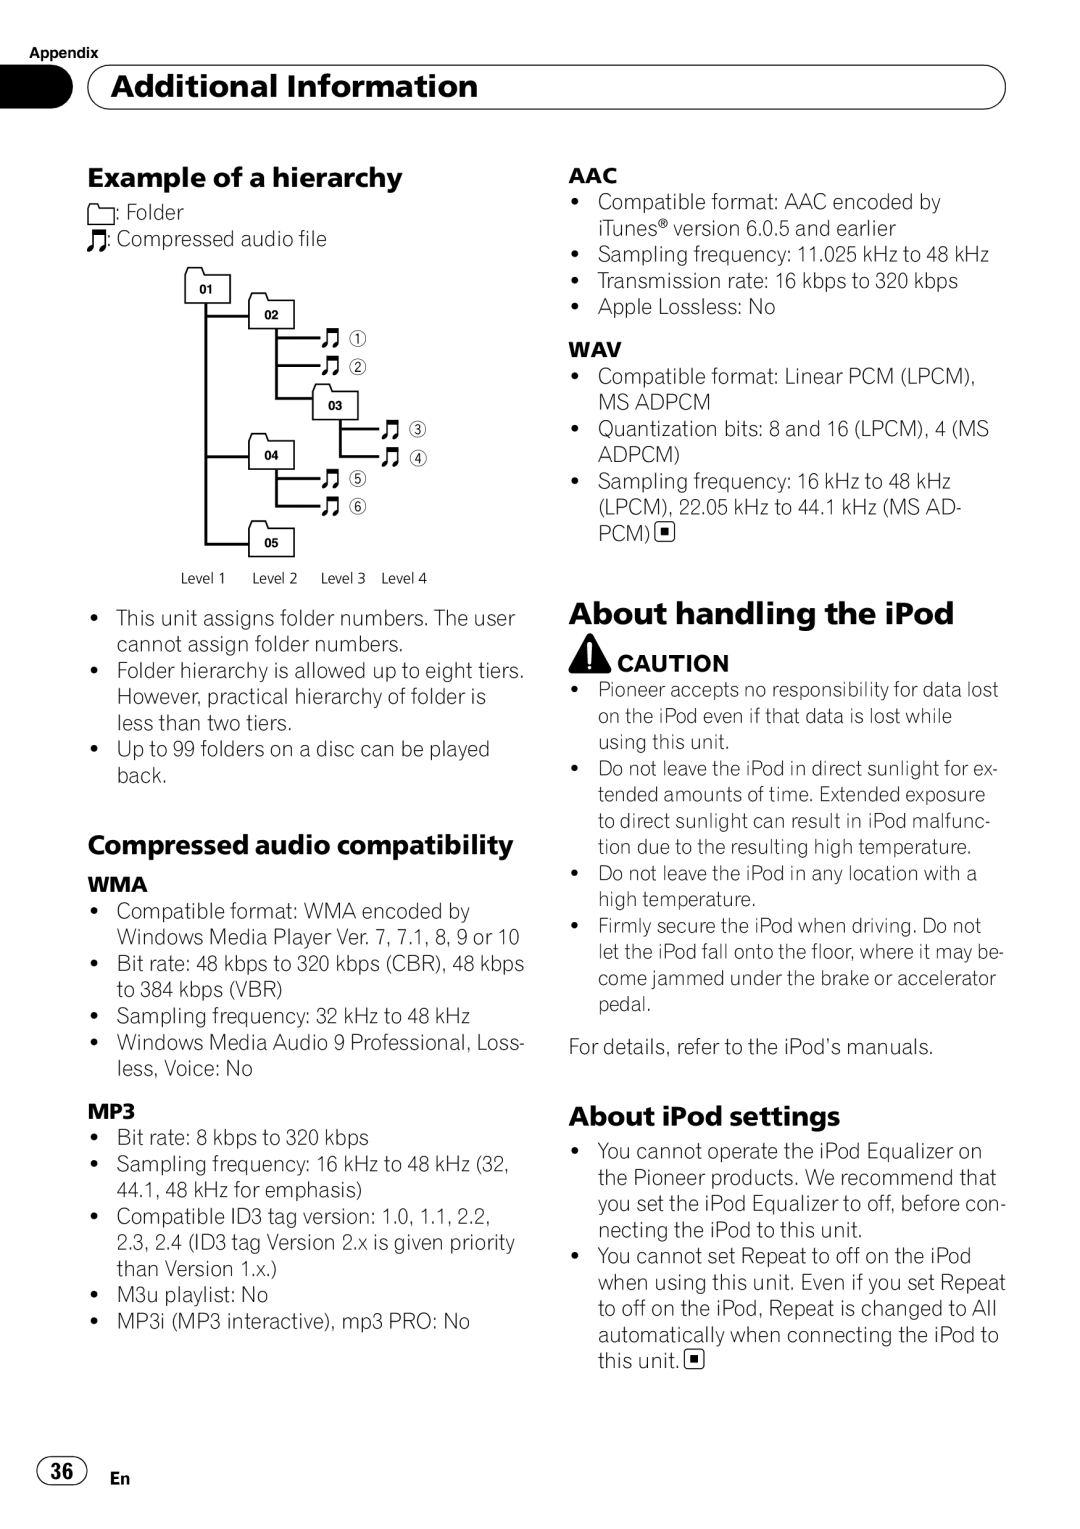 Pioneer SRC7127-B/N About handling the iPod, Example of a hierarchy, Compressed audio compatibility, About iPod settings 